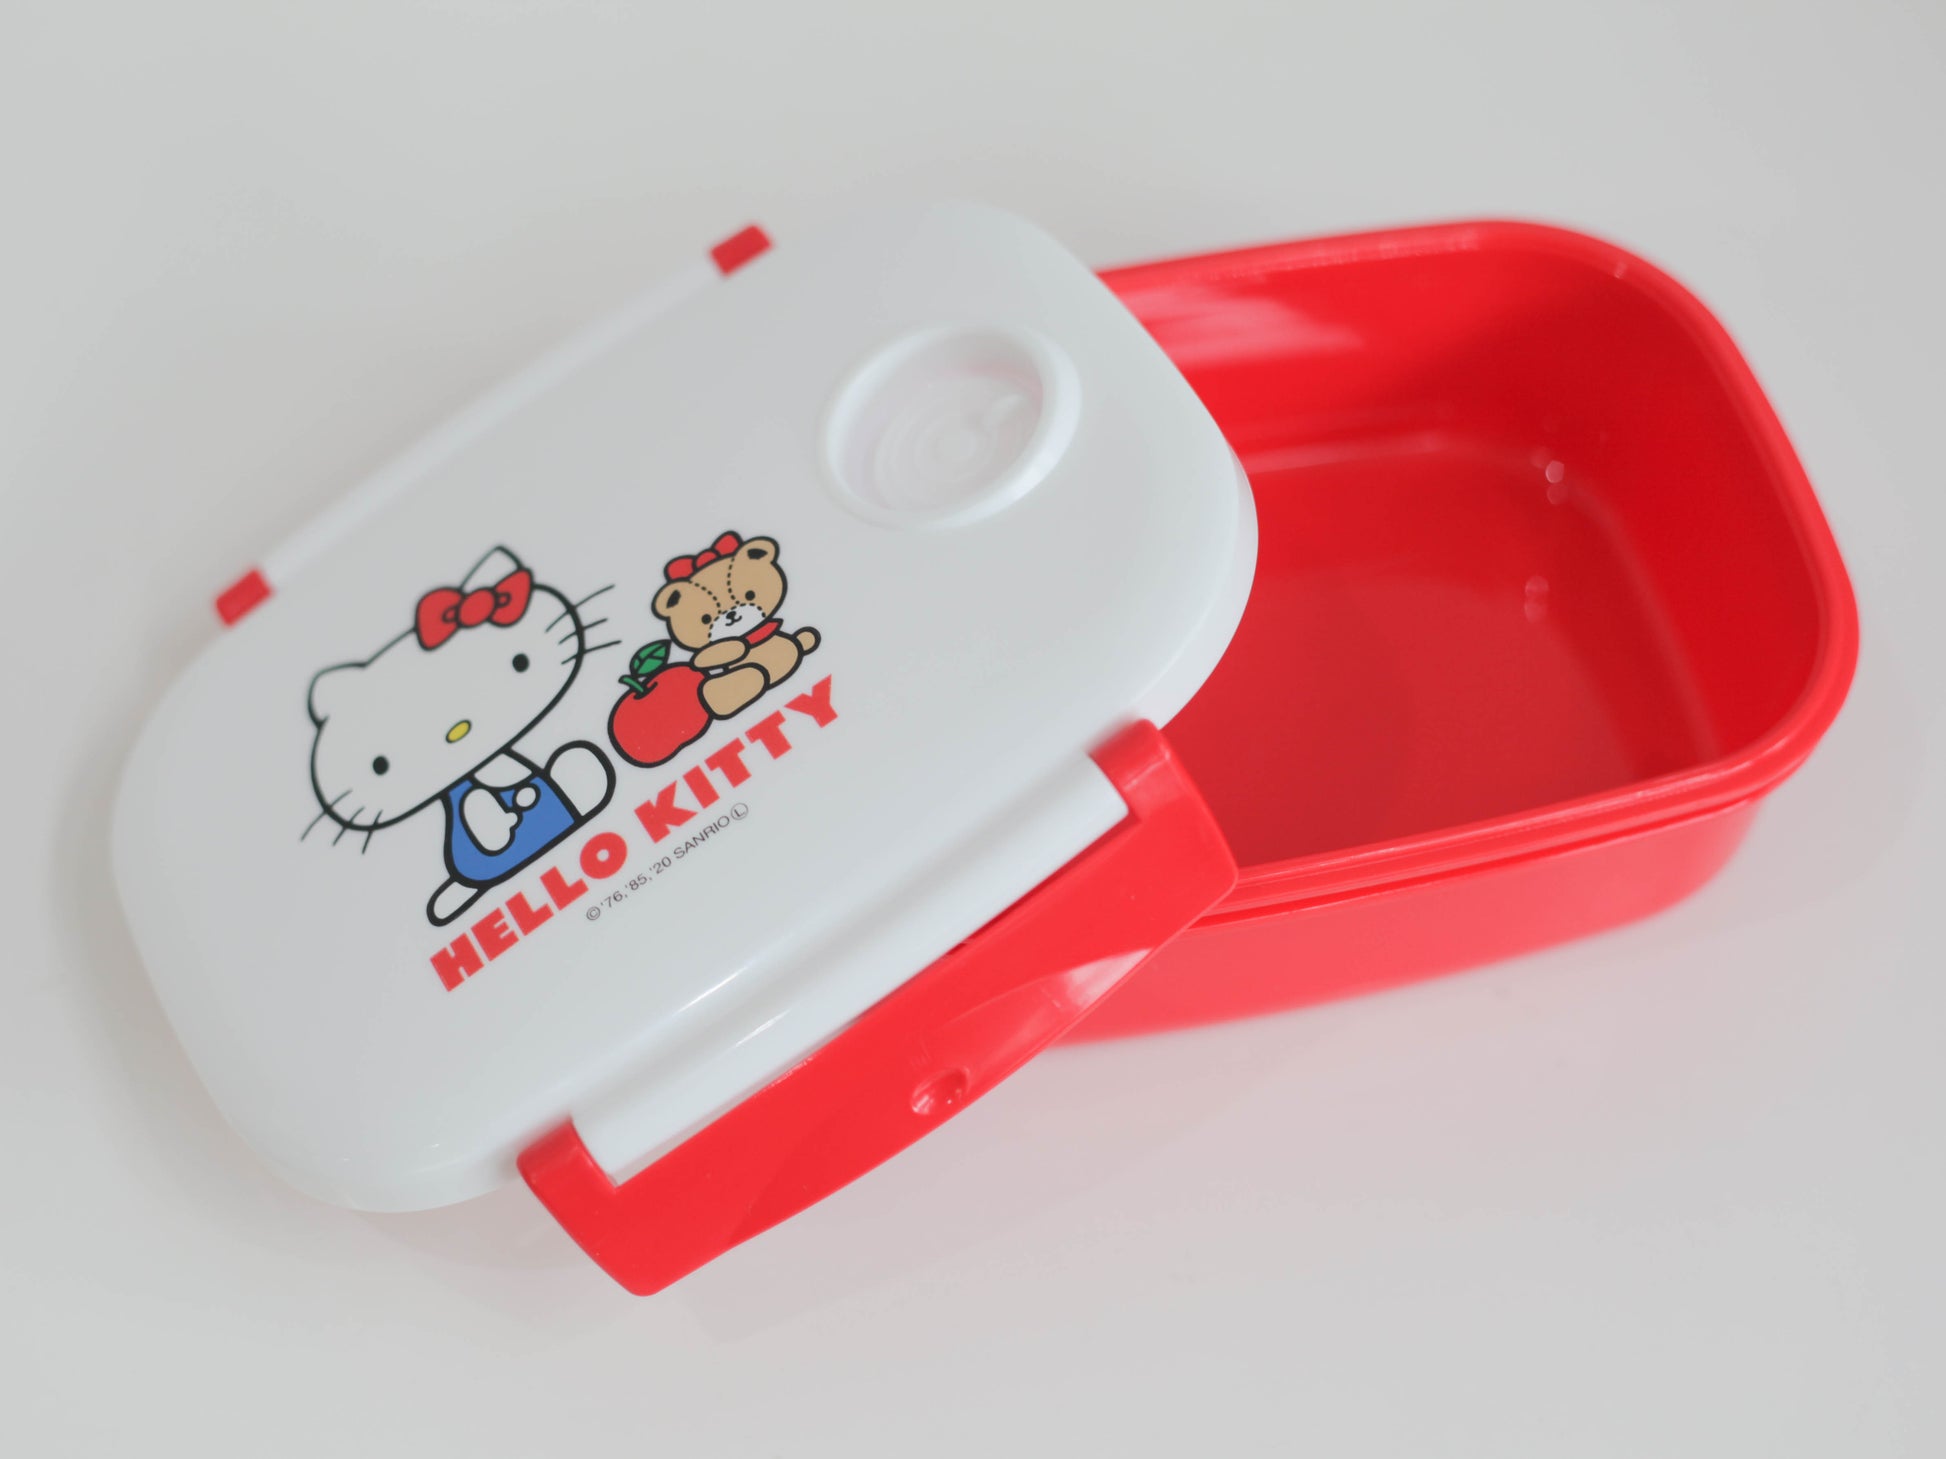 Hello Kitty Food Tray Set Bento Lunch Box Insulated Container Stainless  Steel